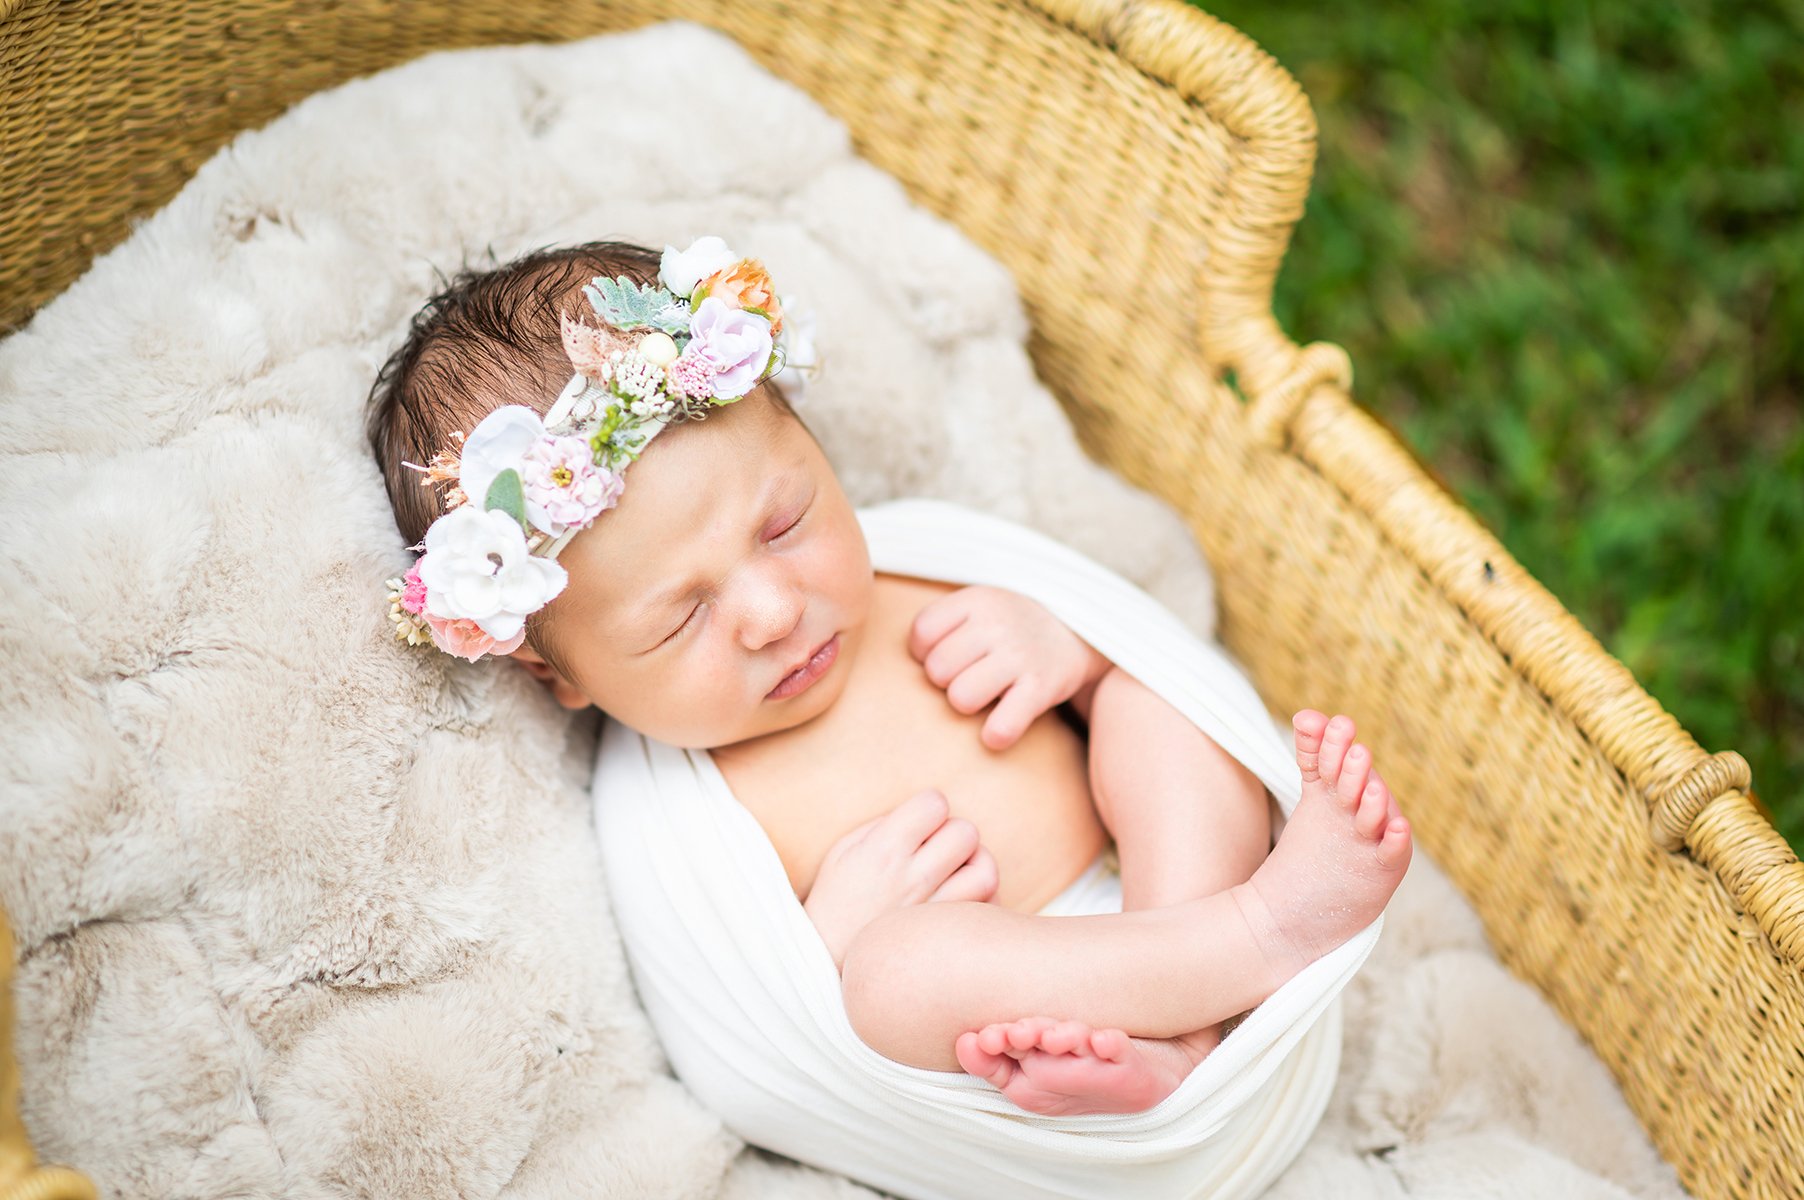  Infant baby with flower crown and wrapped in cheese cloth 